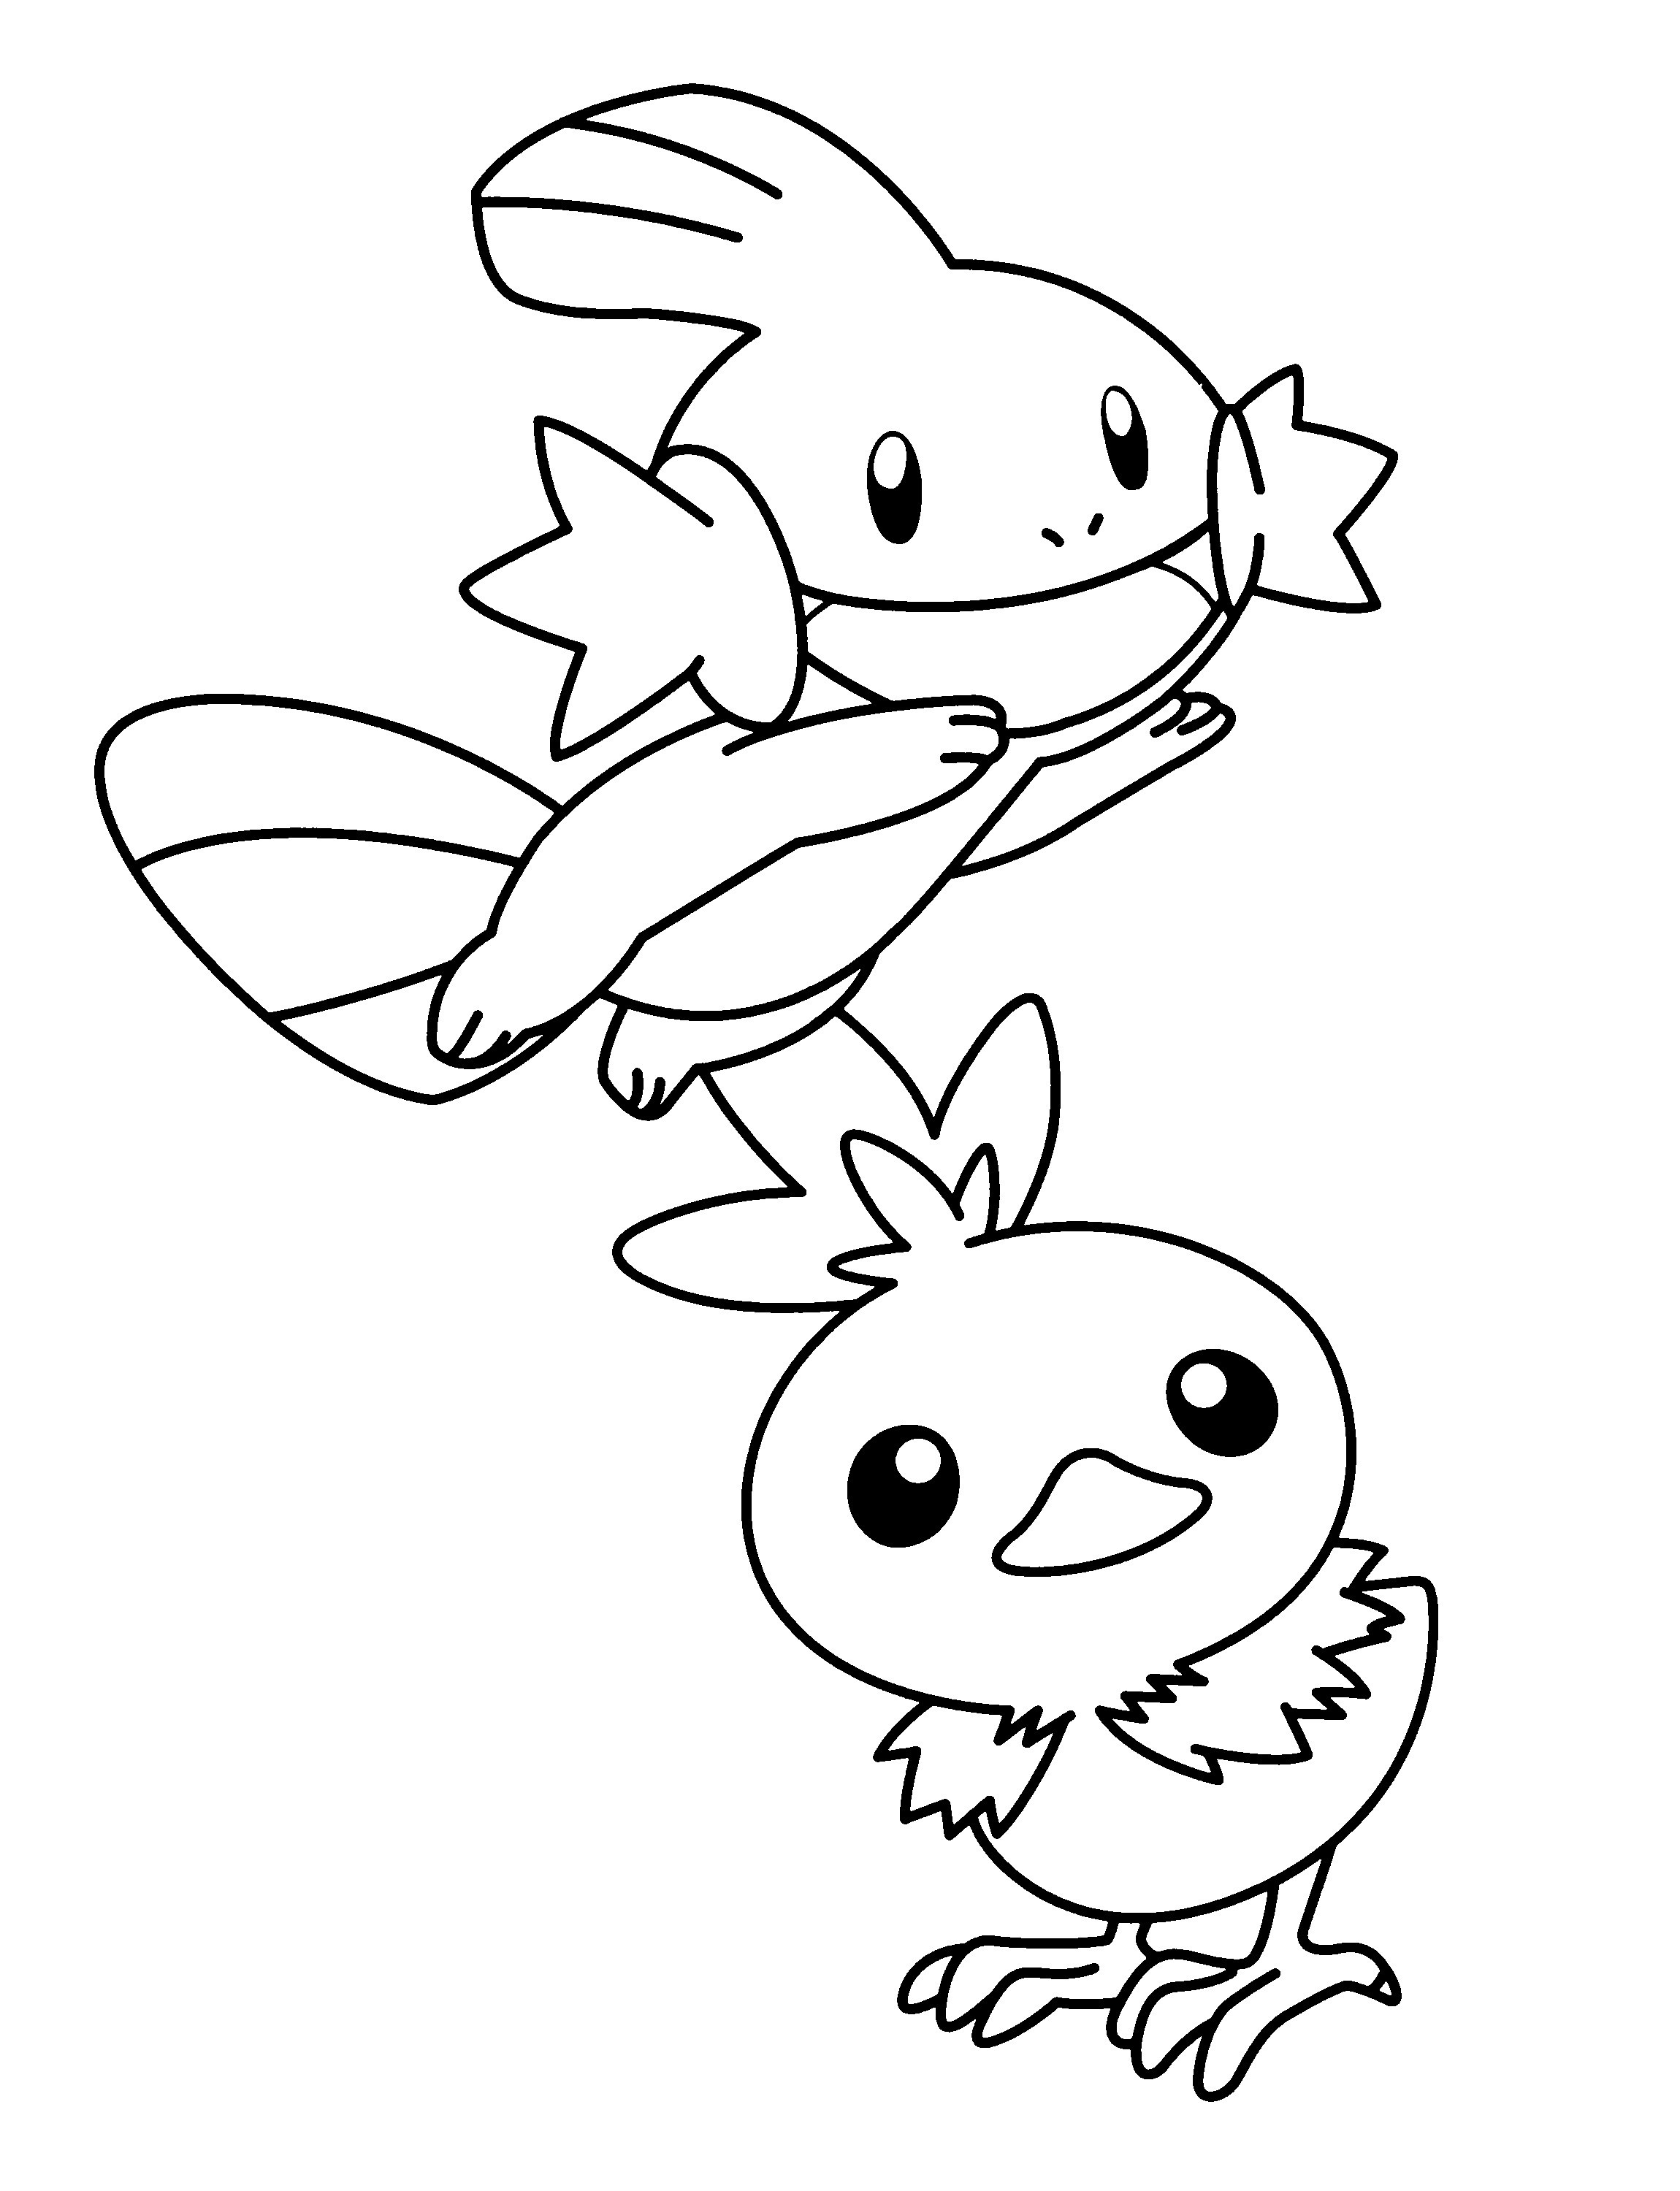 Pokemon Mudkip Coloring Pages Striking Page